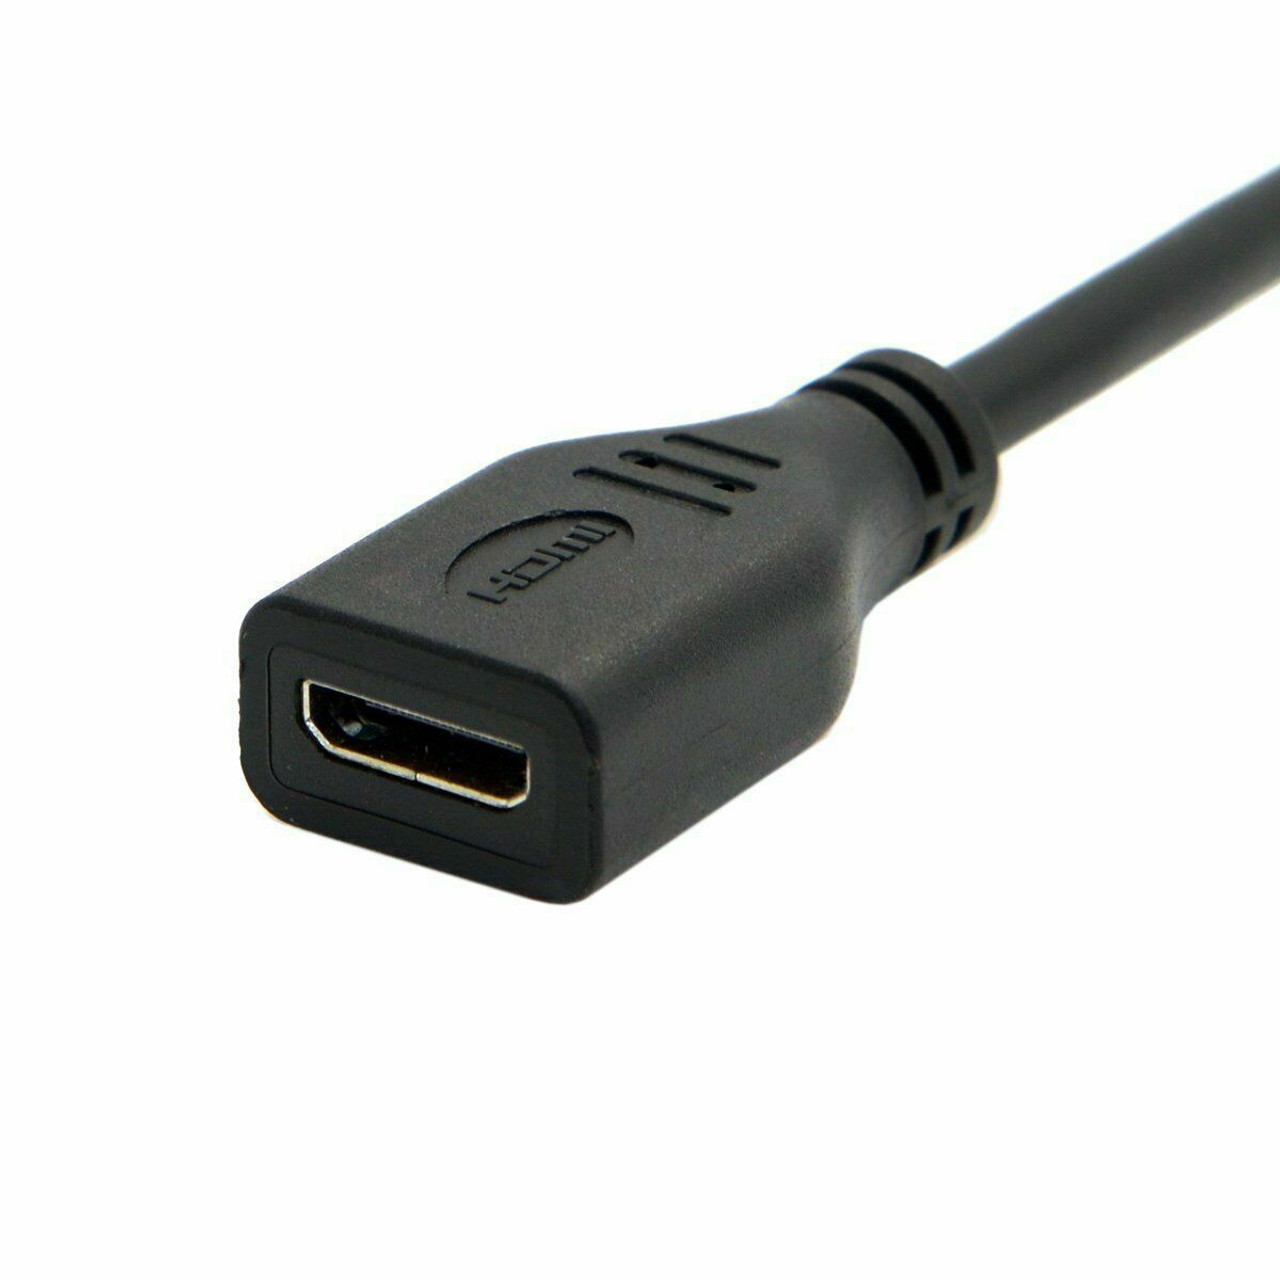 Micro HDMI Type D Male to HDMI Type A Female Cable Adapter Converter Connector